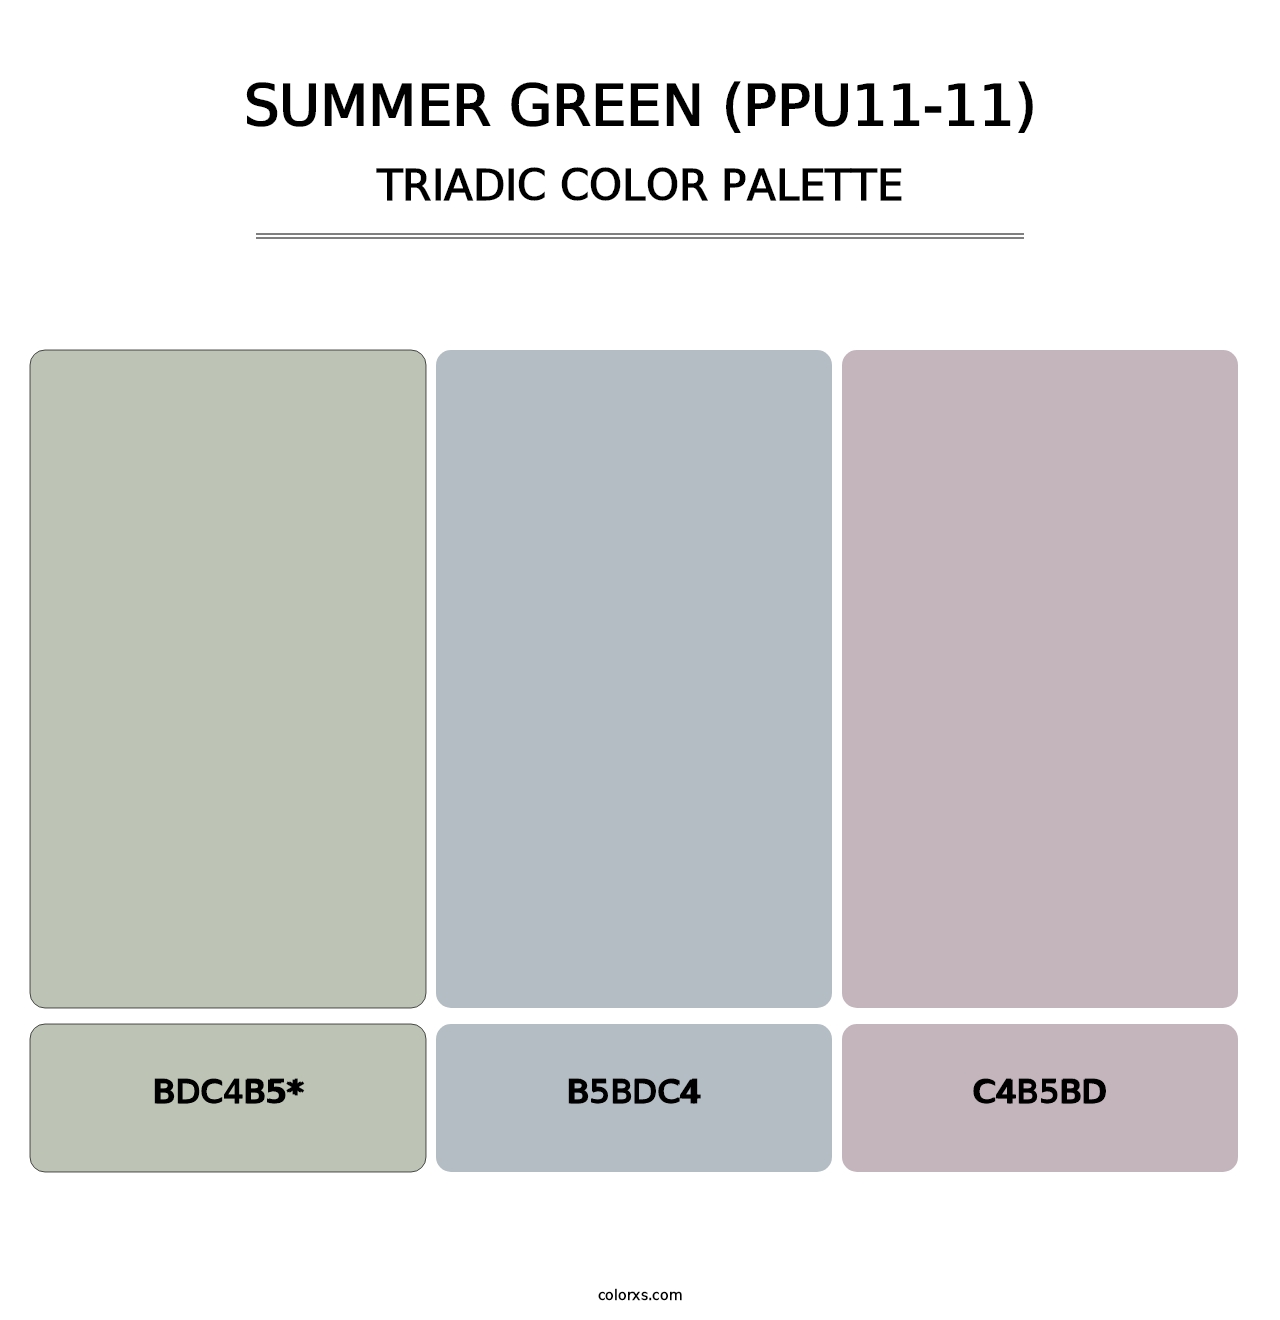 Summer Green (PPU11-11) - Triadic Color Palette